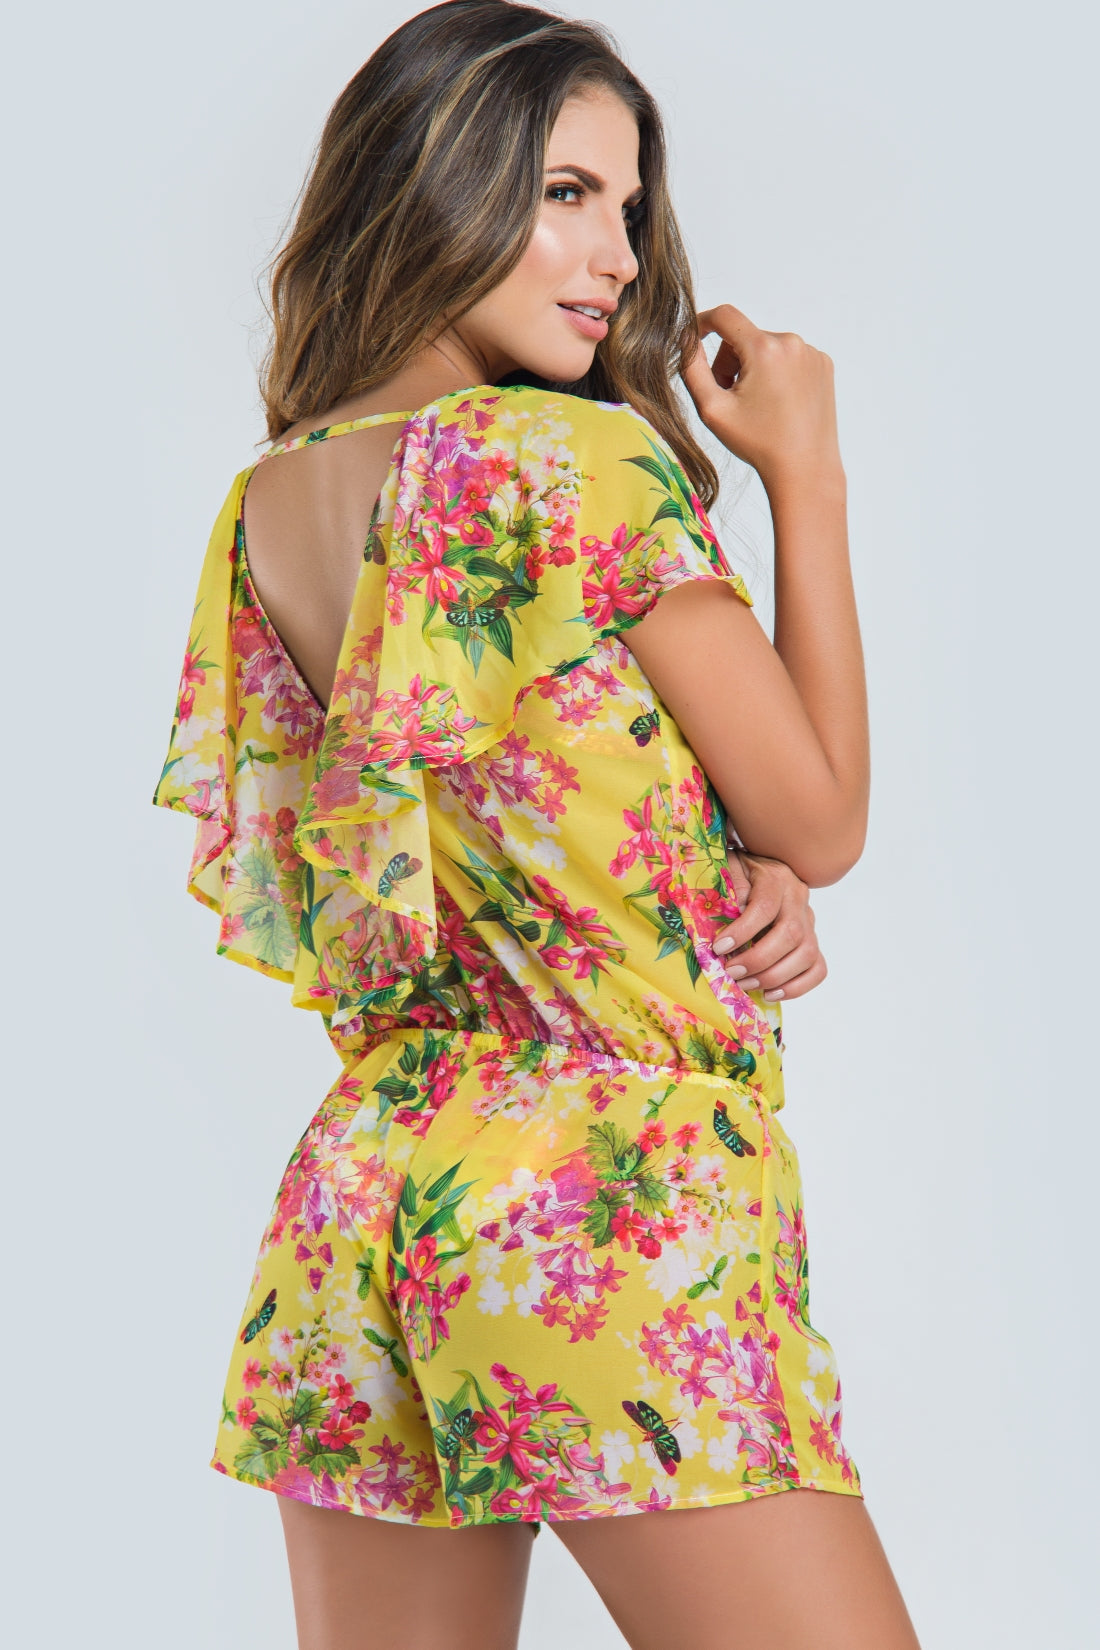 Bug Party Romper Cover Up